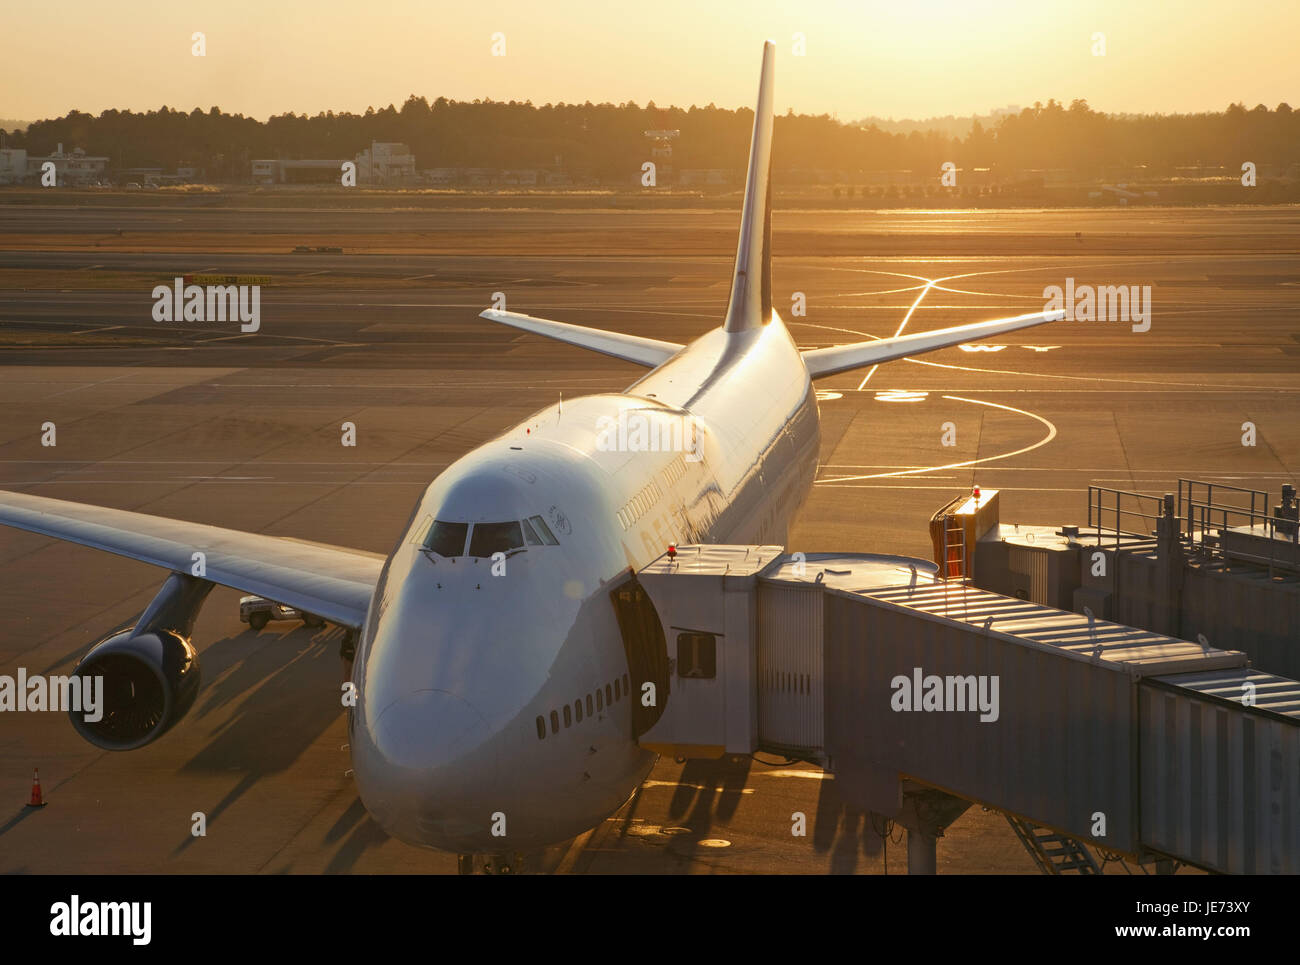 Japan, Tokyo, Narita international airport, landing field, airplane, airport, outside, travel, journey by air, vacation, evening tuning, evening, nobody, arrival, takeoff, Stock Photo